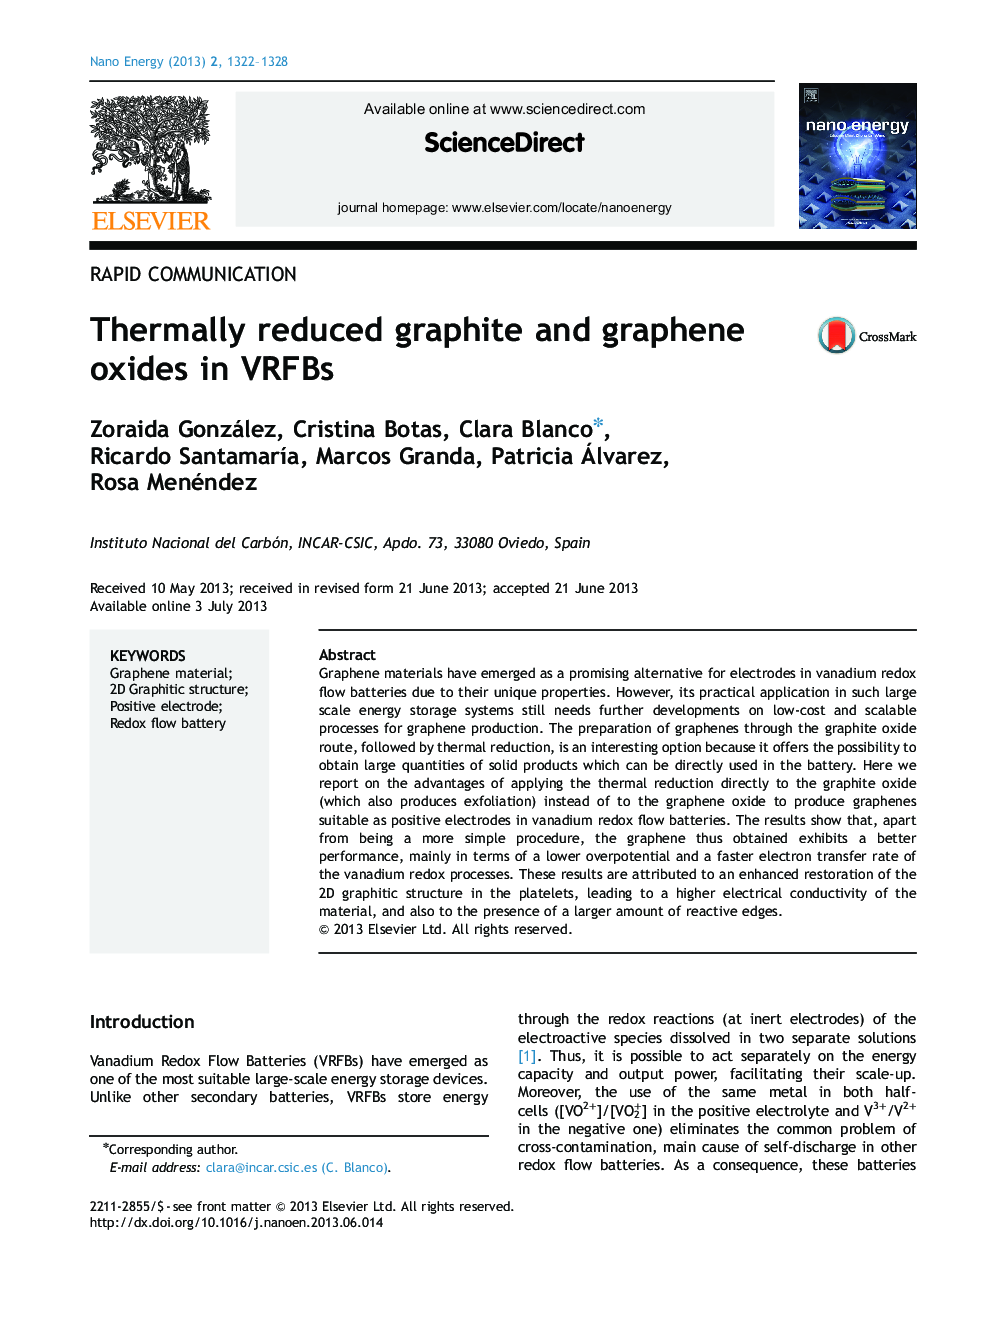 Thermally reduced graphite and graphene oxides in VRFBs